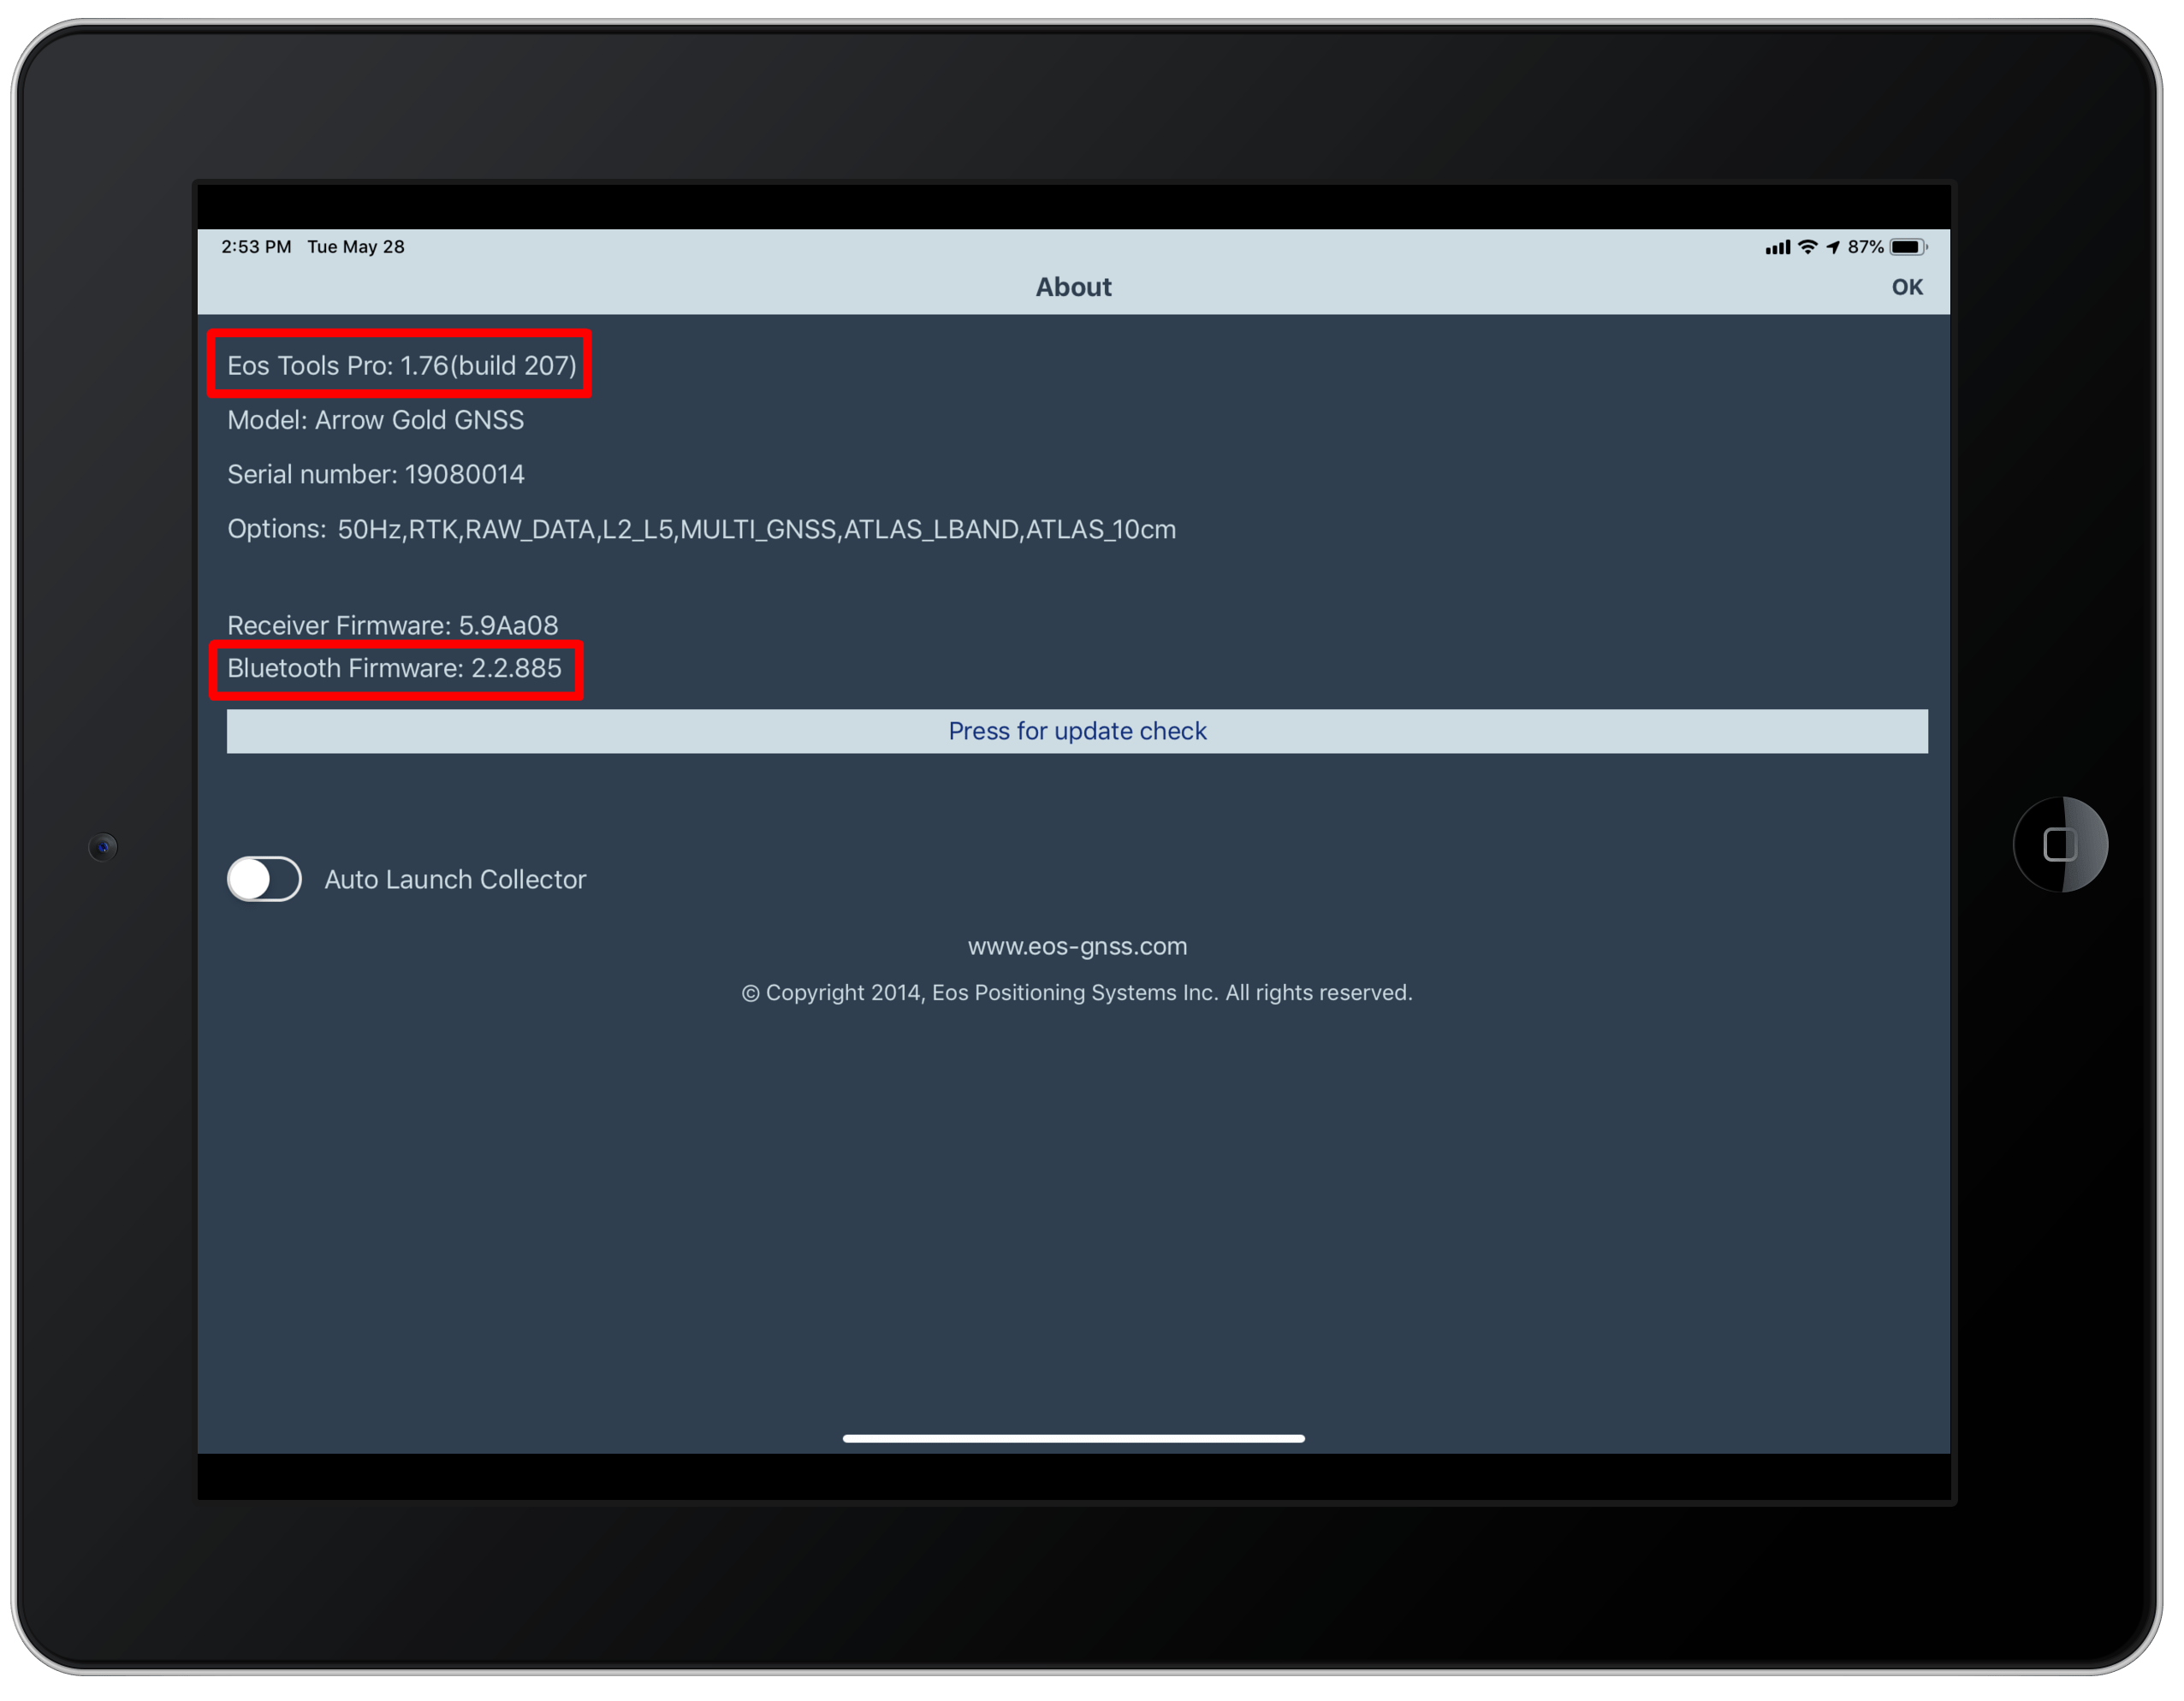 How to update your Bluetooth firmware in Eos Tools Pro from Eos Positioning Systems; shown here is your Bluetooth firmware screen